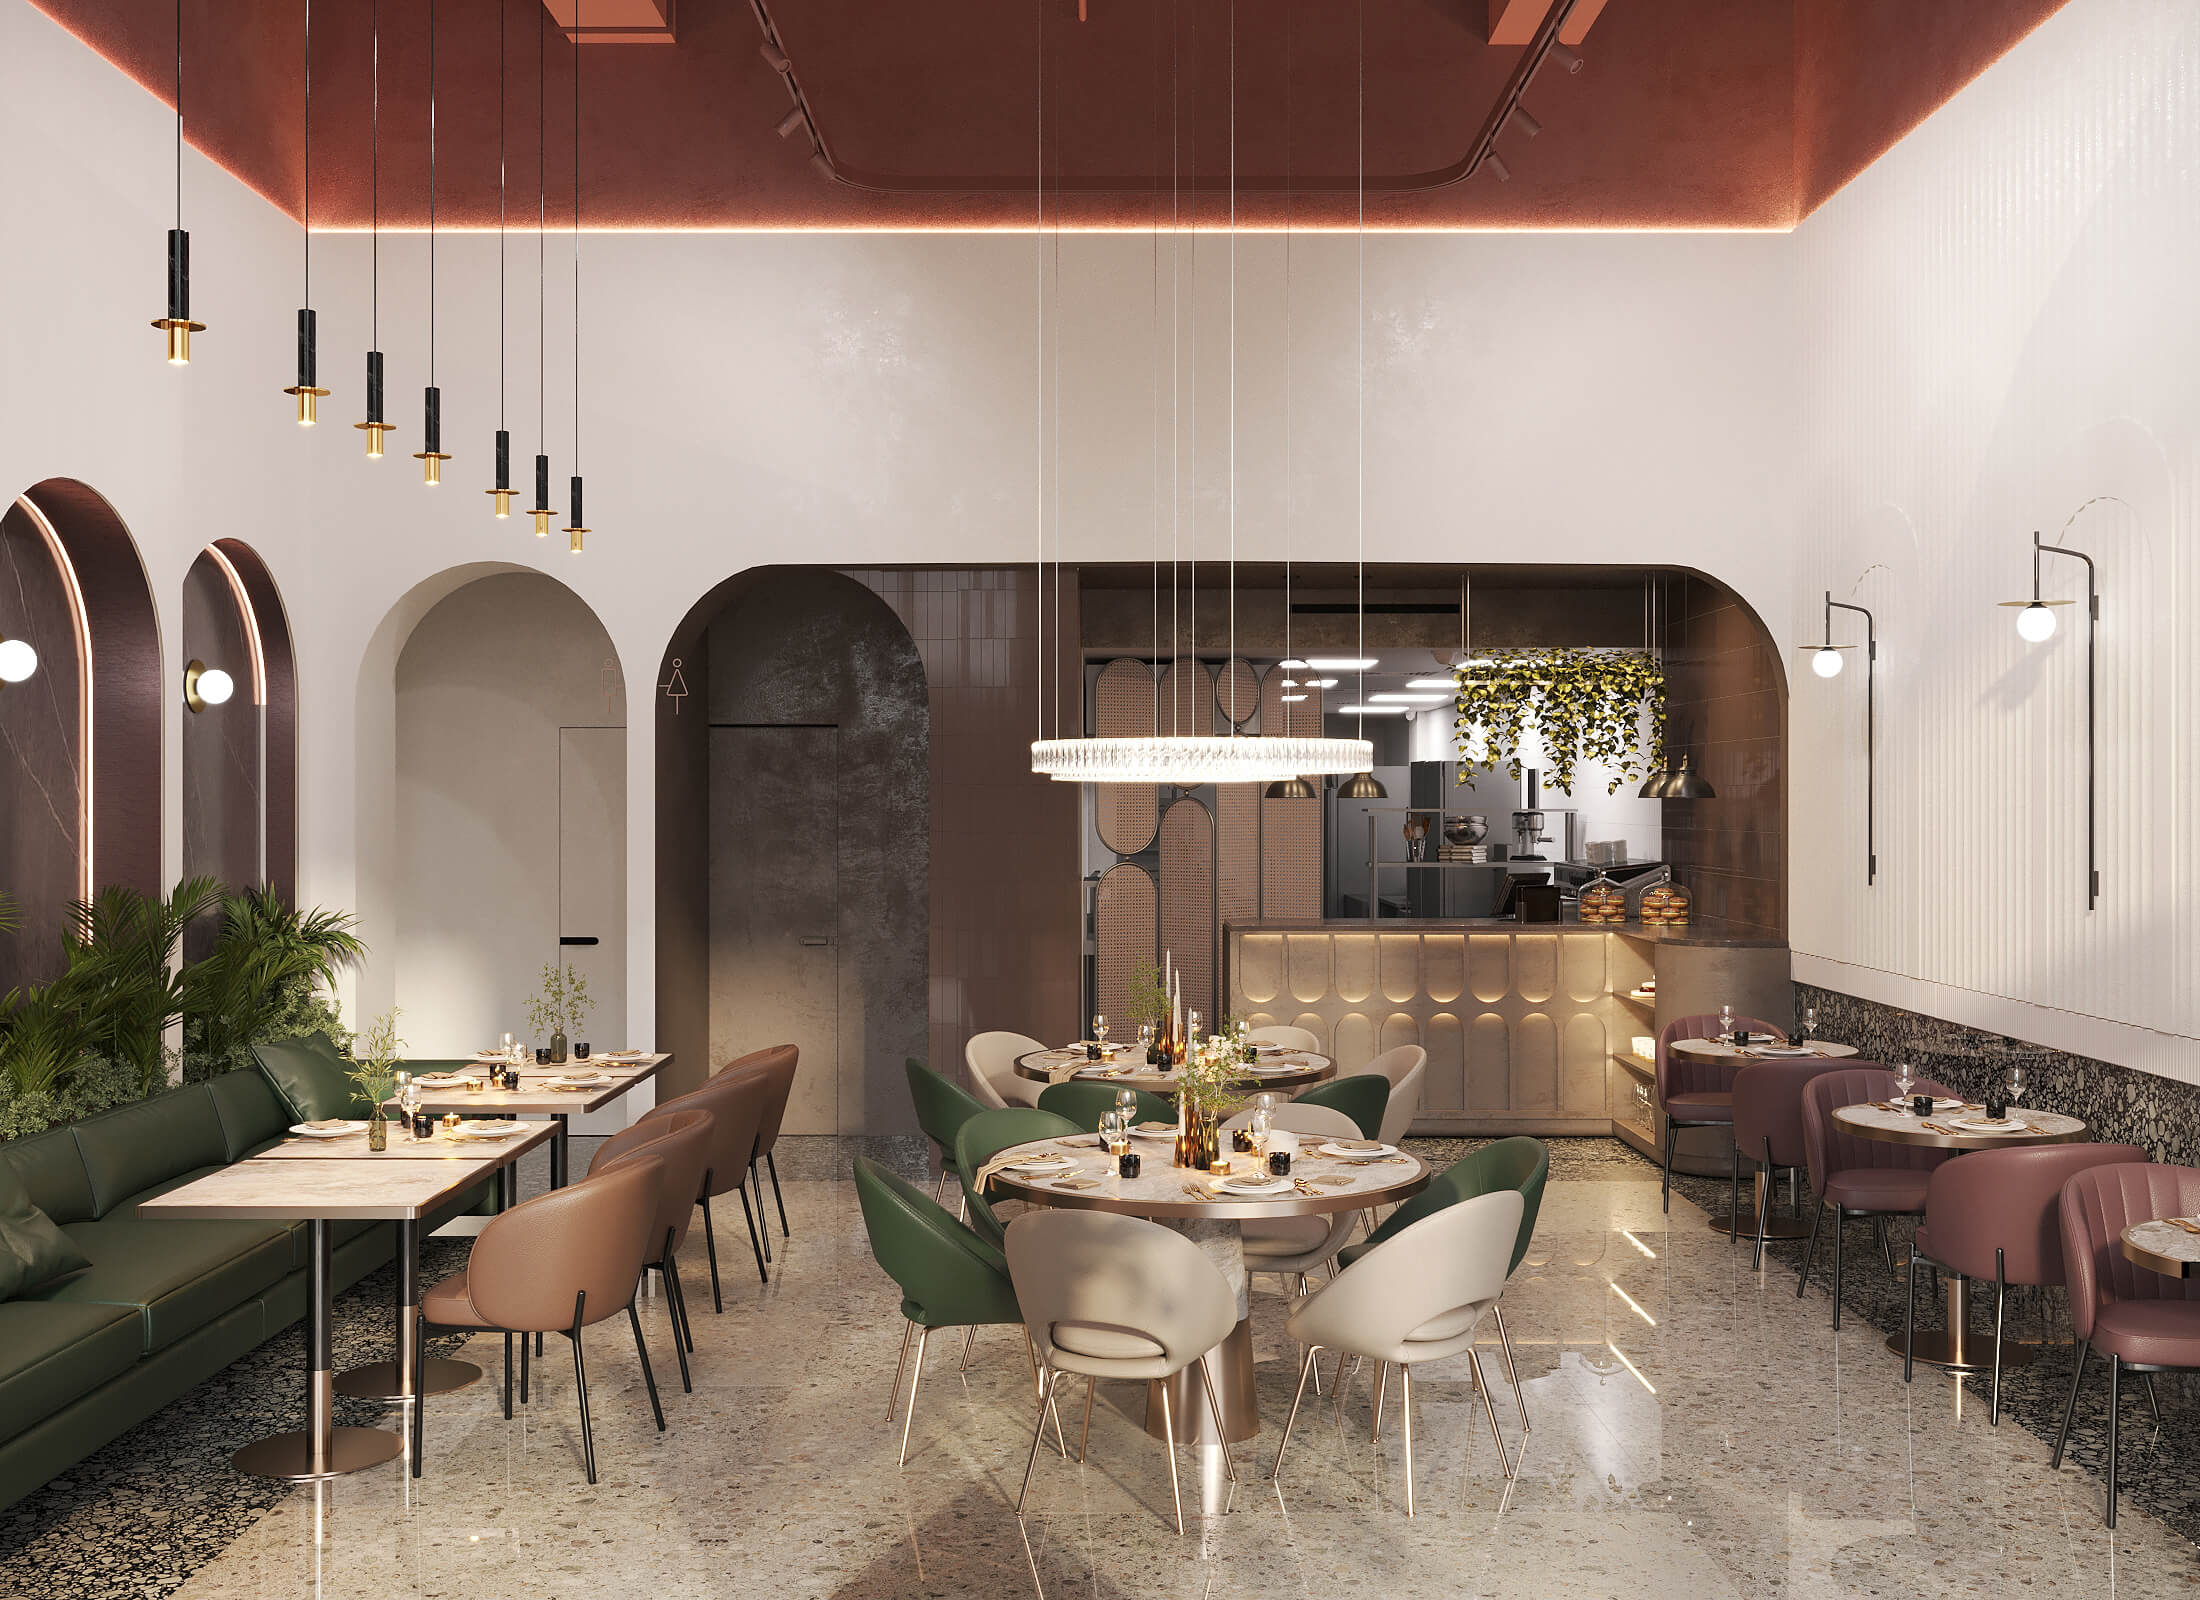 Restaurant Interior Design: How To Attract Visitors Not Only With Exquisite Dishes? 7